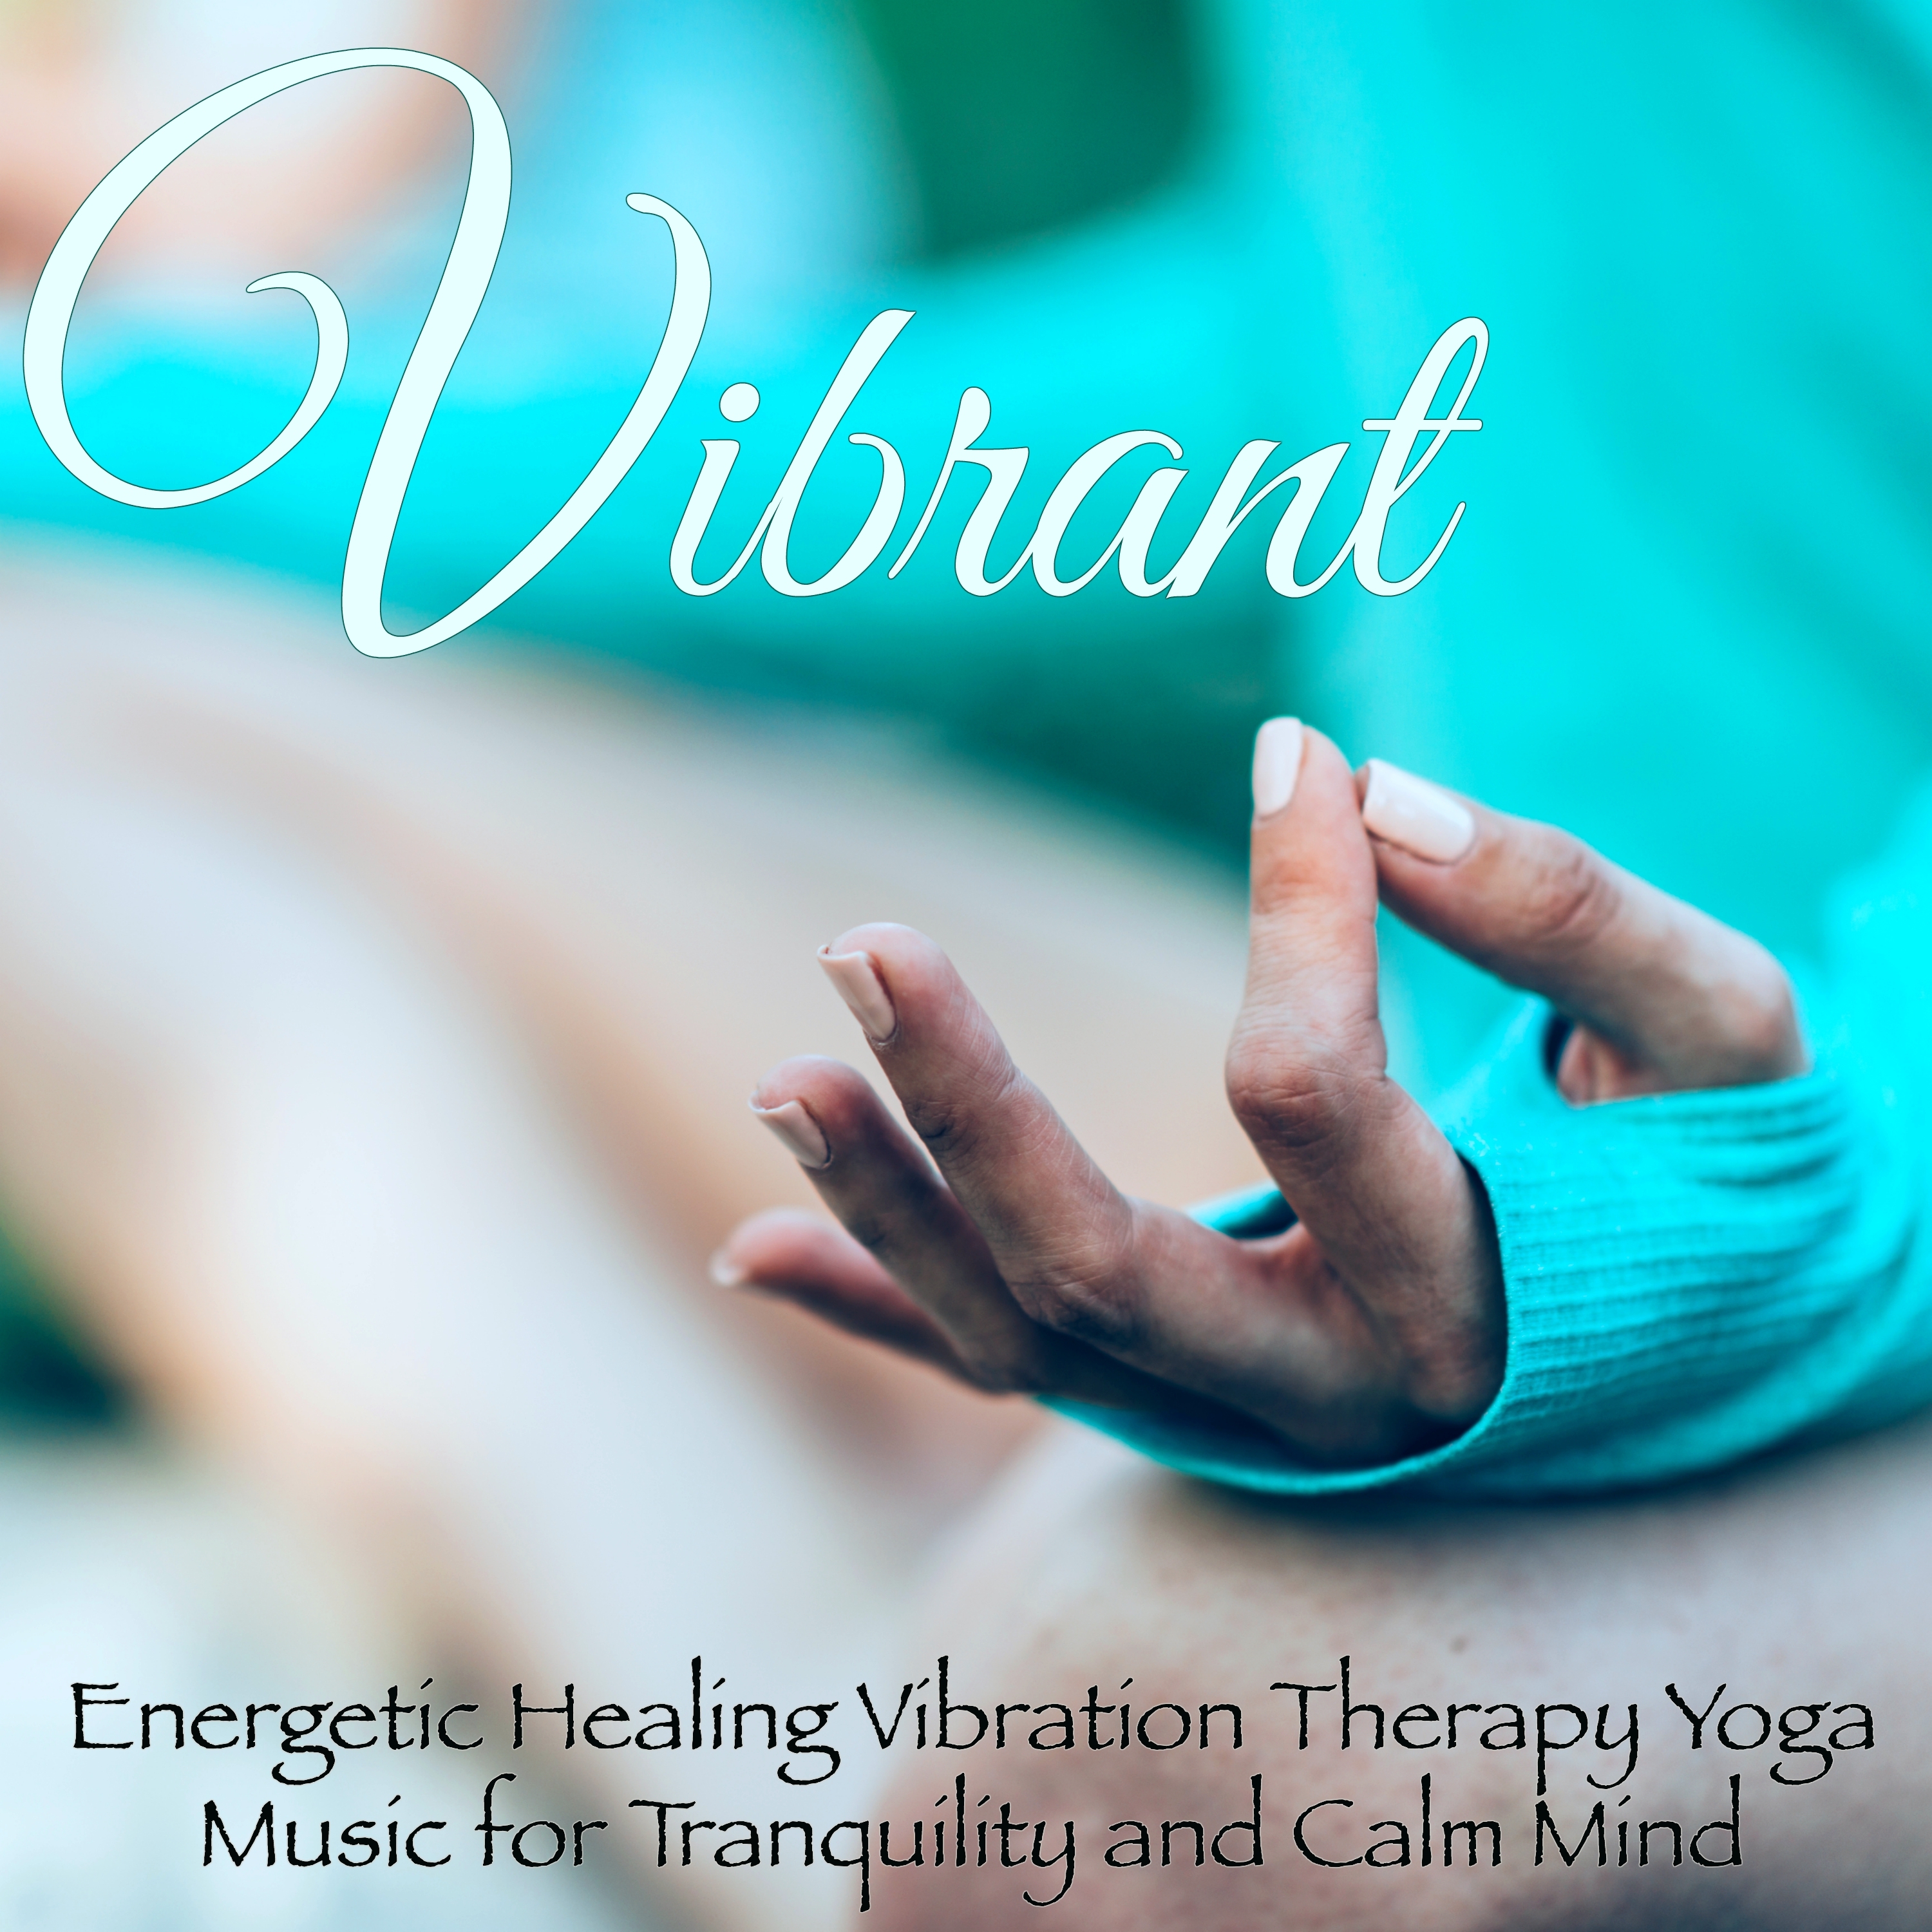 Vibrant – Energetic Healing Vibration Therapy Yoga Music for Tranquility and Calm Mind